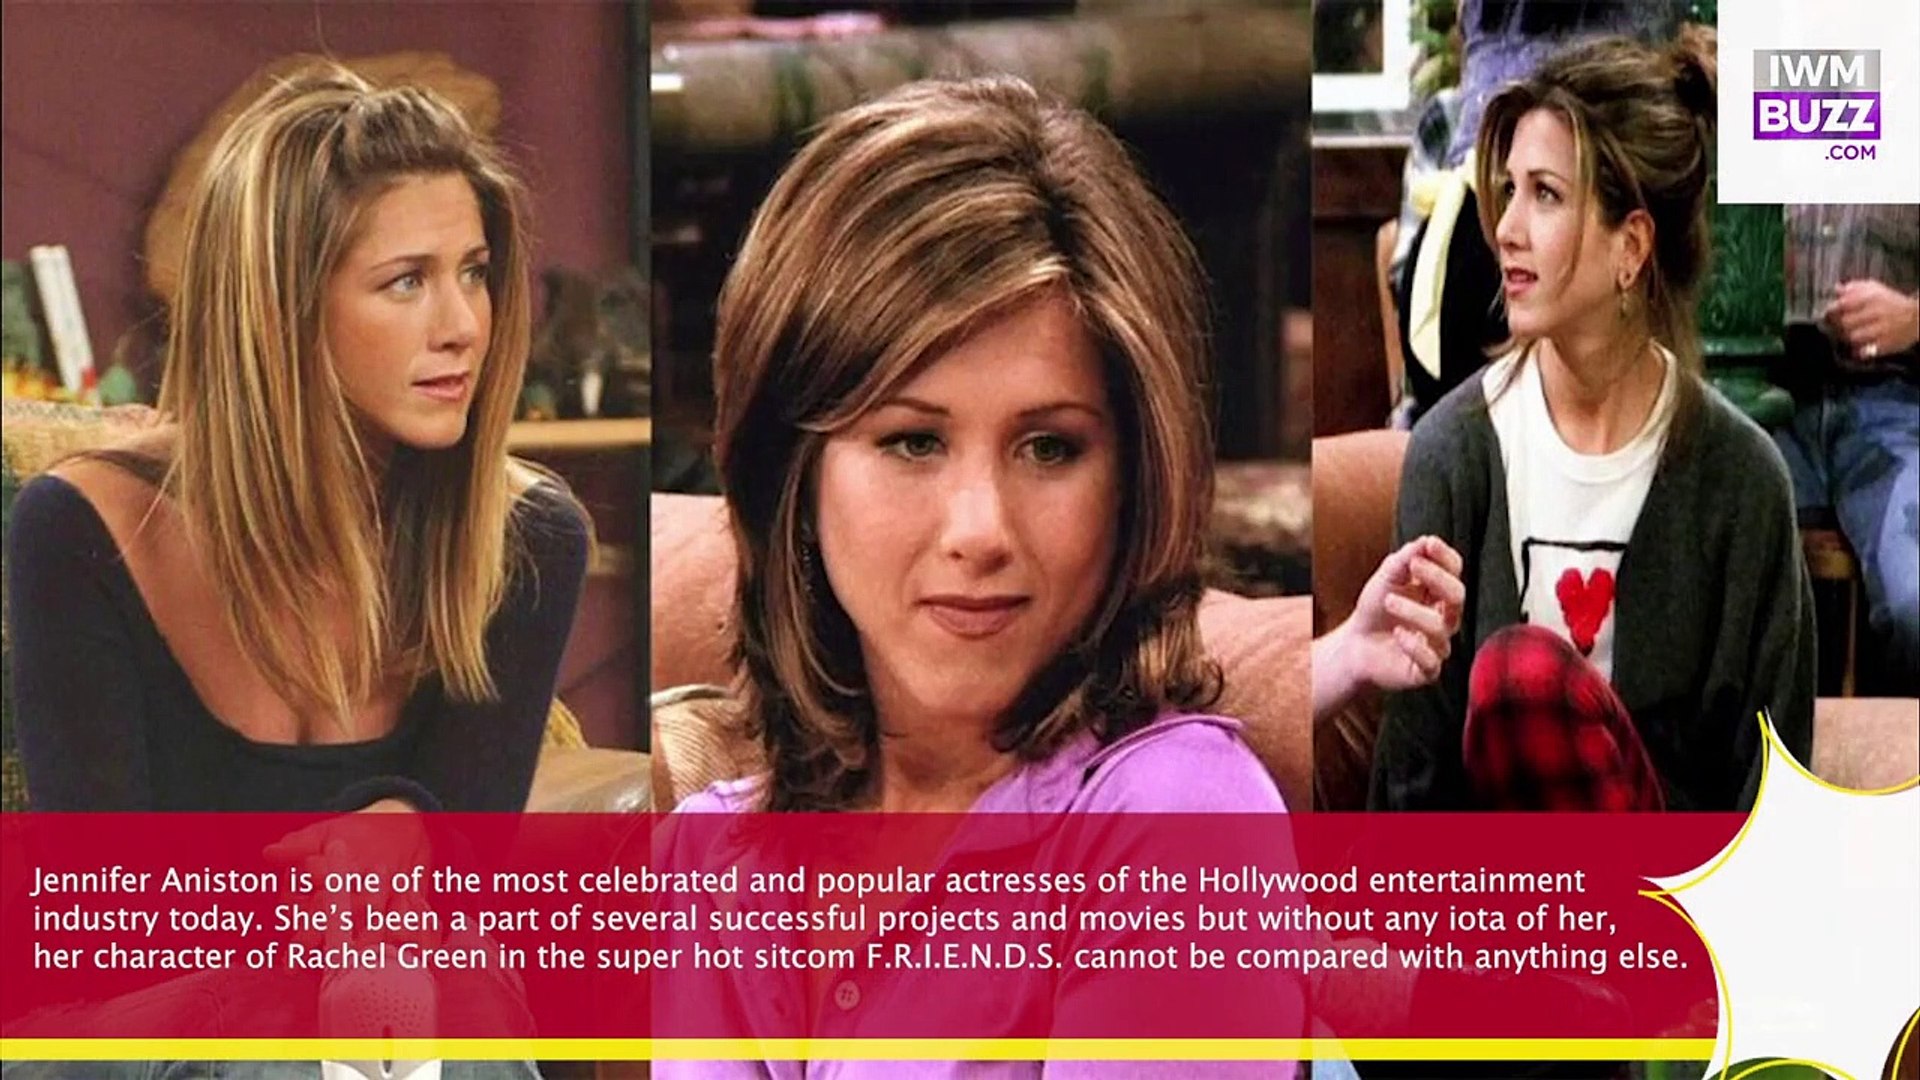 Jennifer Aniston discusses her sexy Friends' outfits